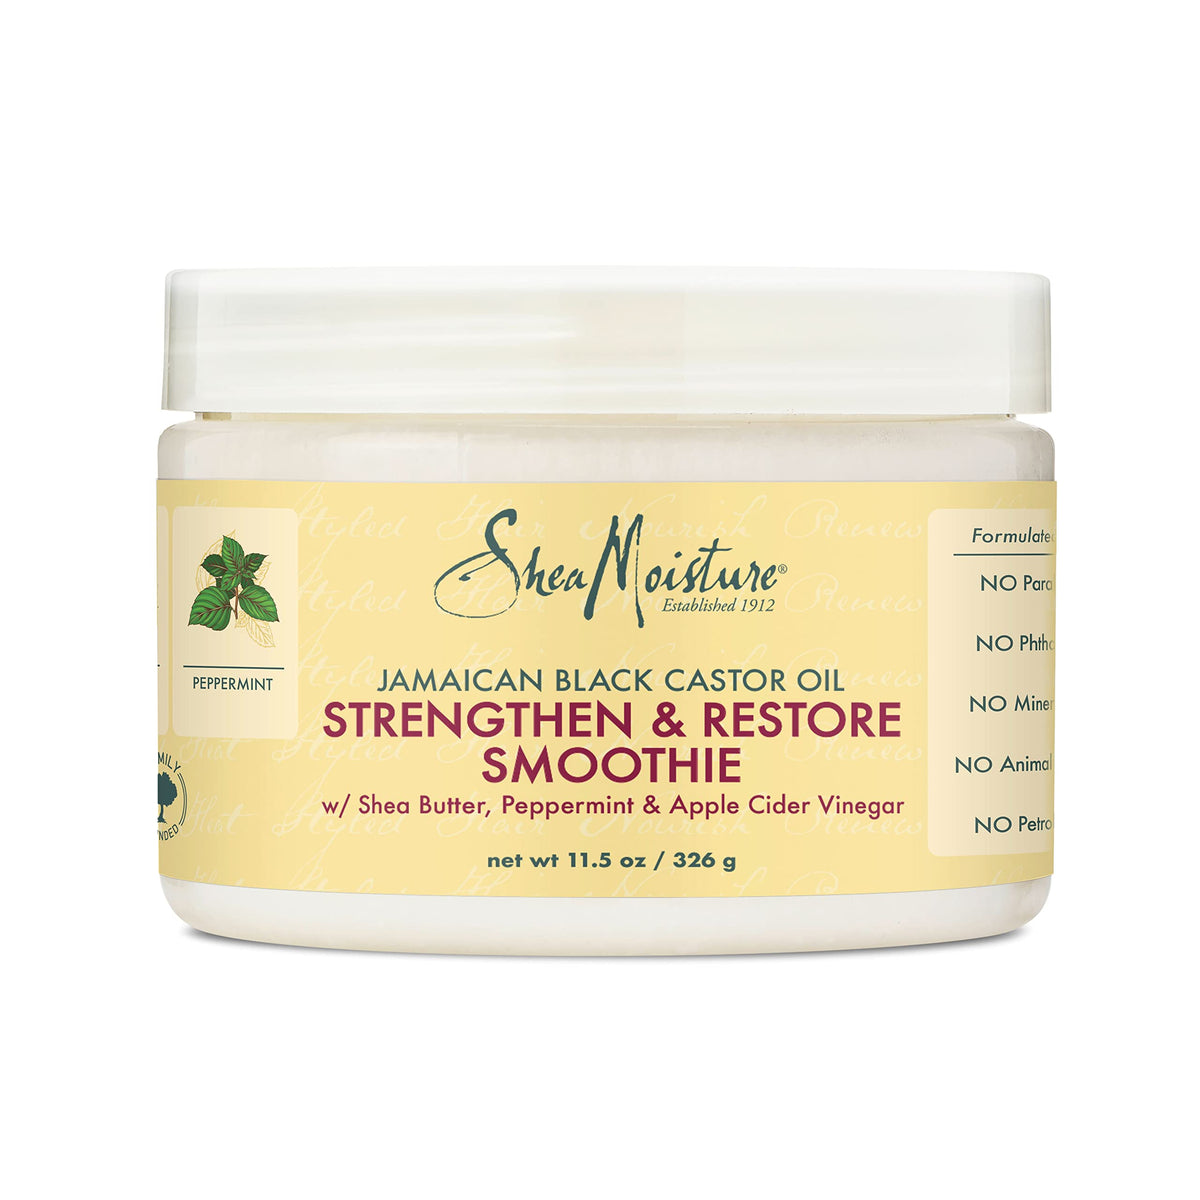 SheaMoisture Strengthen and Restore Smoothie Jamaican Black Castor Oil, 11.5 oz